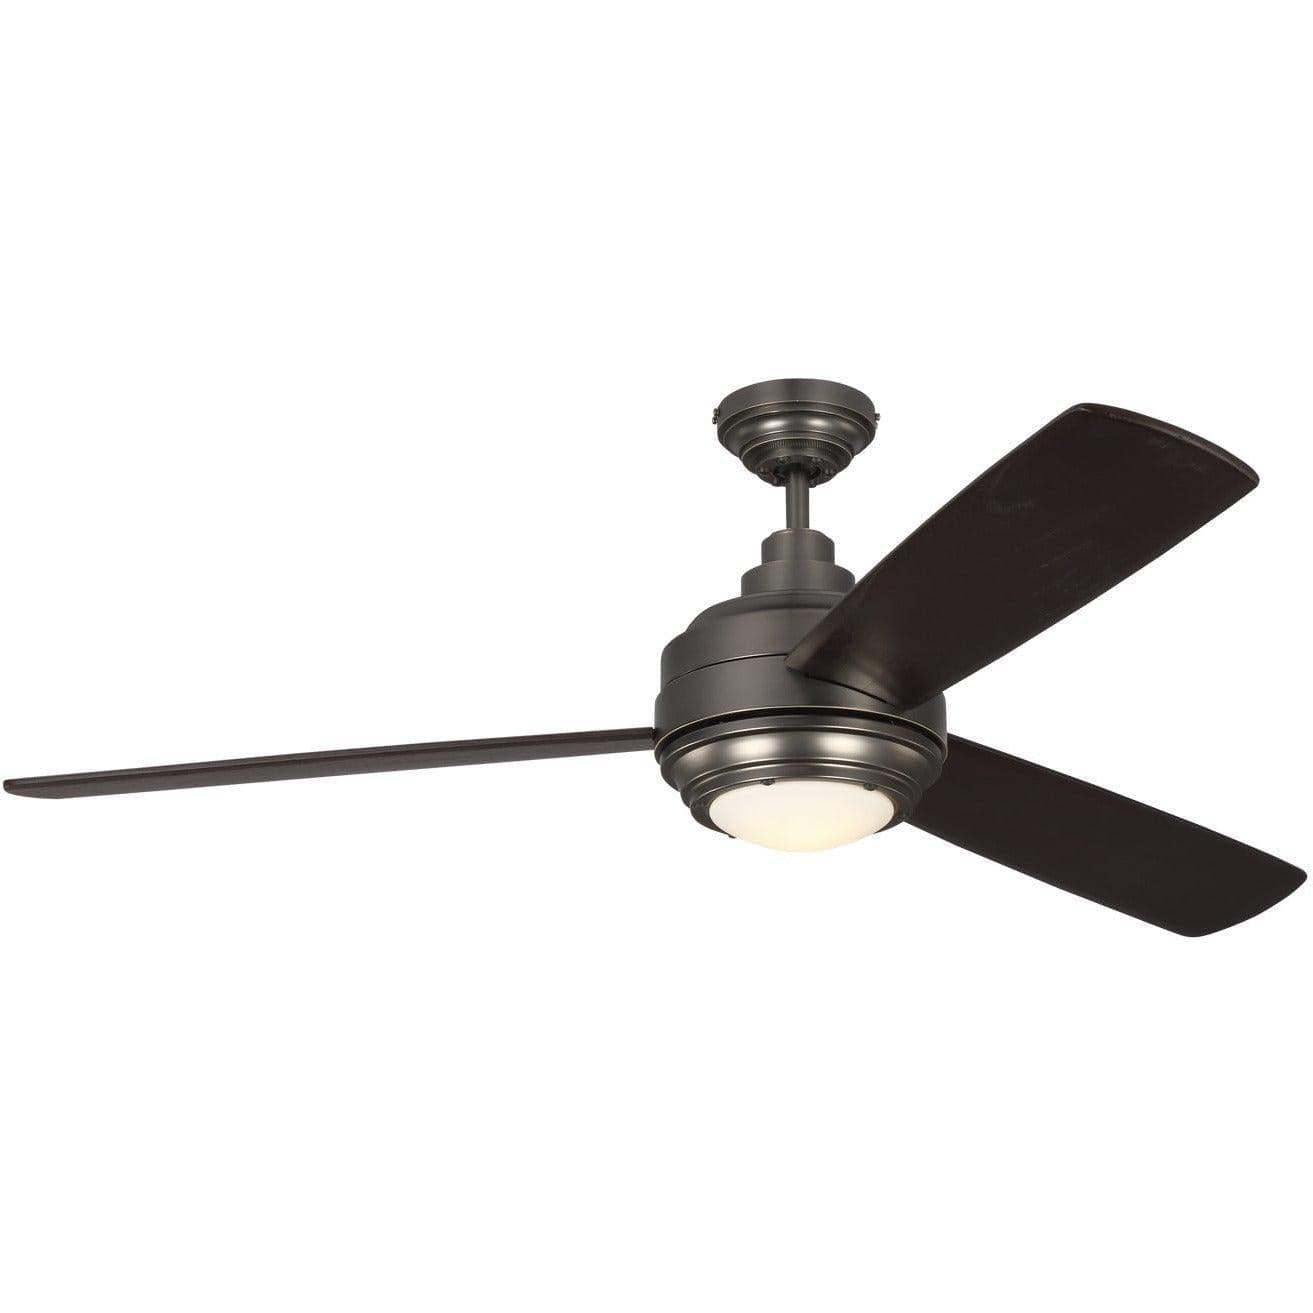 Visual Comfort Fan Collection - Aerotour 56" Ceiling Fan - 3TAR56BNZD | Montreal Lighting & Hardware